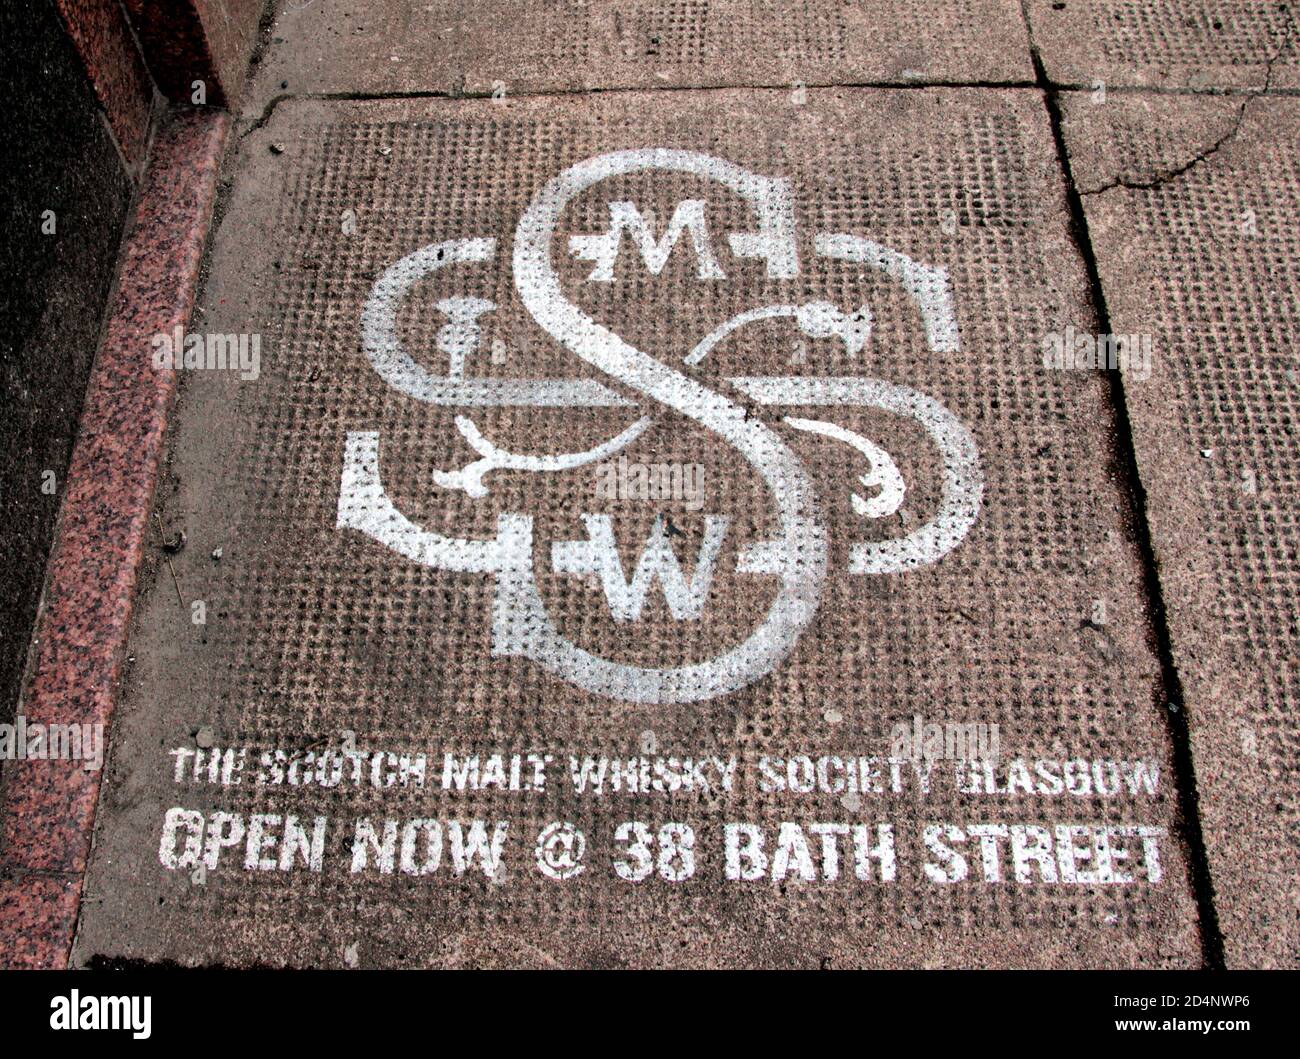 Unusually, a stencilled sign on the pavement, indicates that you have found the location of The Scottish Malt Whisky Society Glasgow. You will find this at No 36 Bate Street, Glasgow, Scotland. ALAN WYLIE/ALAMY© Stock Photo